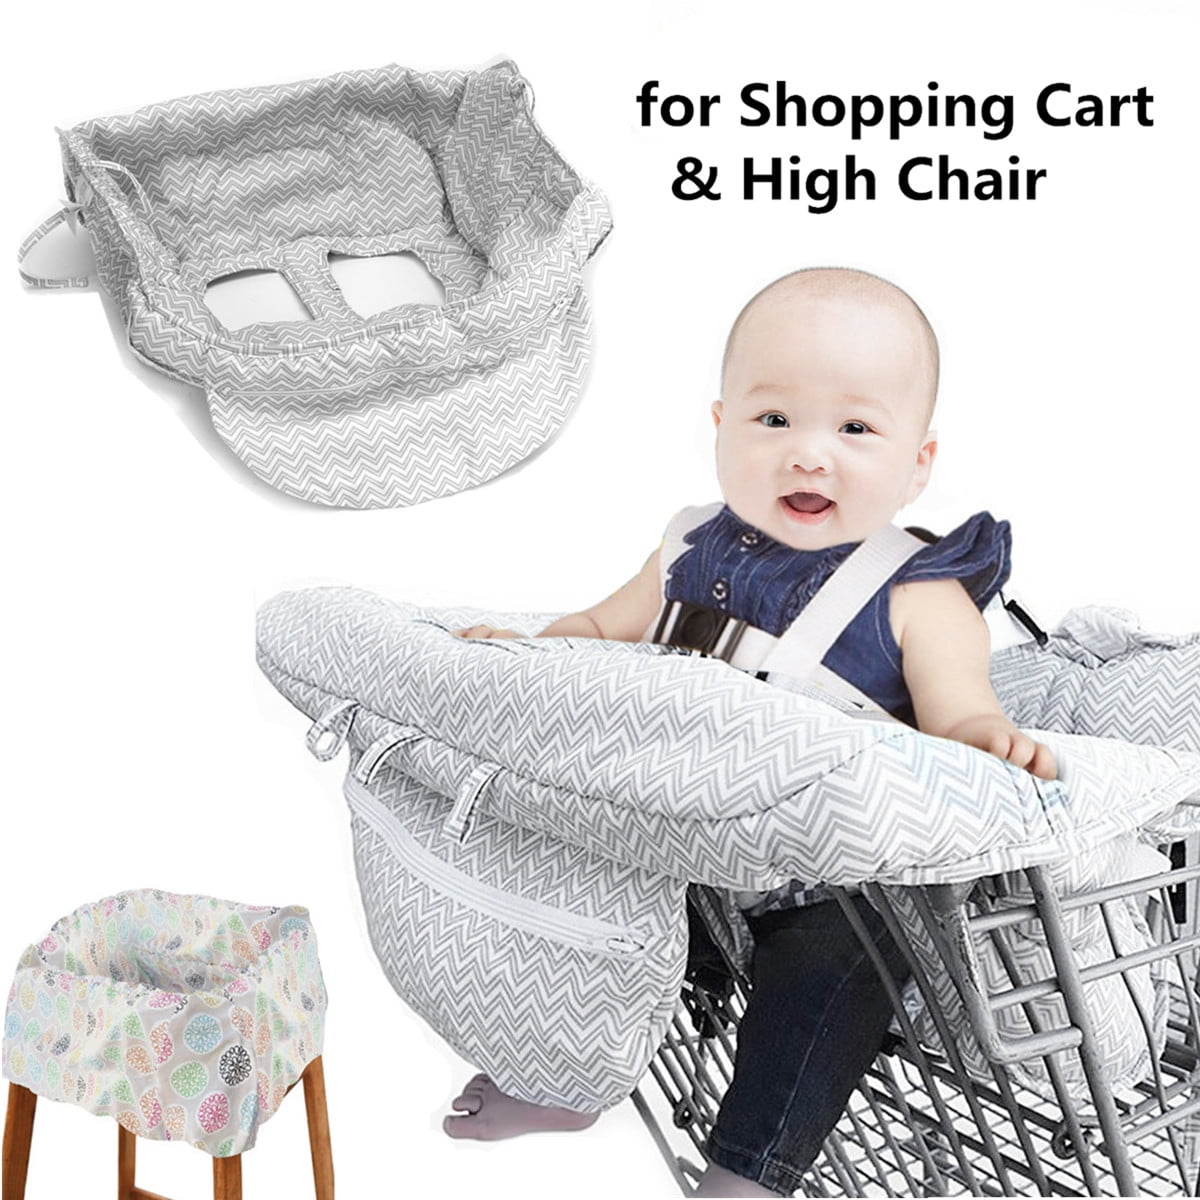 Foldable Baby Shopping Trolley Cart Seat Pad Kid High Chair Protective Mat Cover 